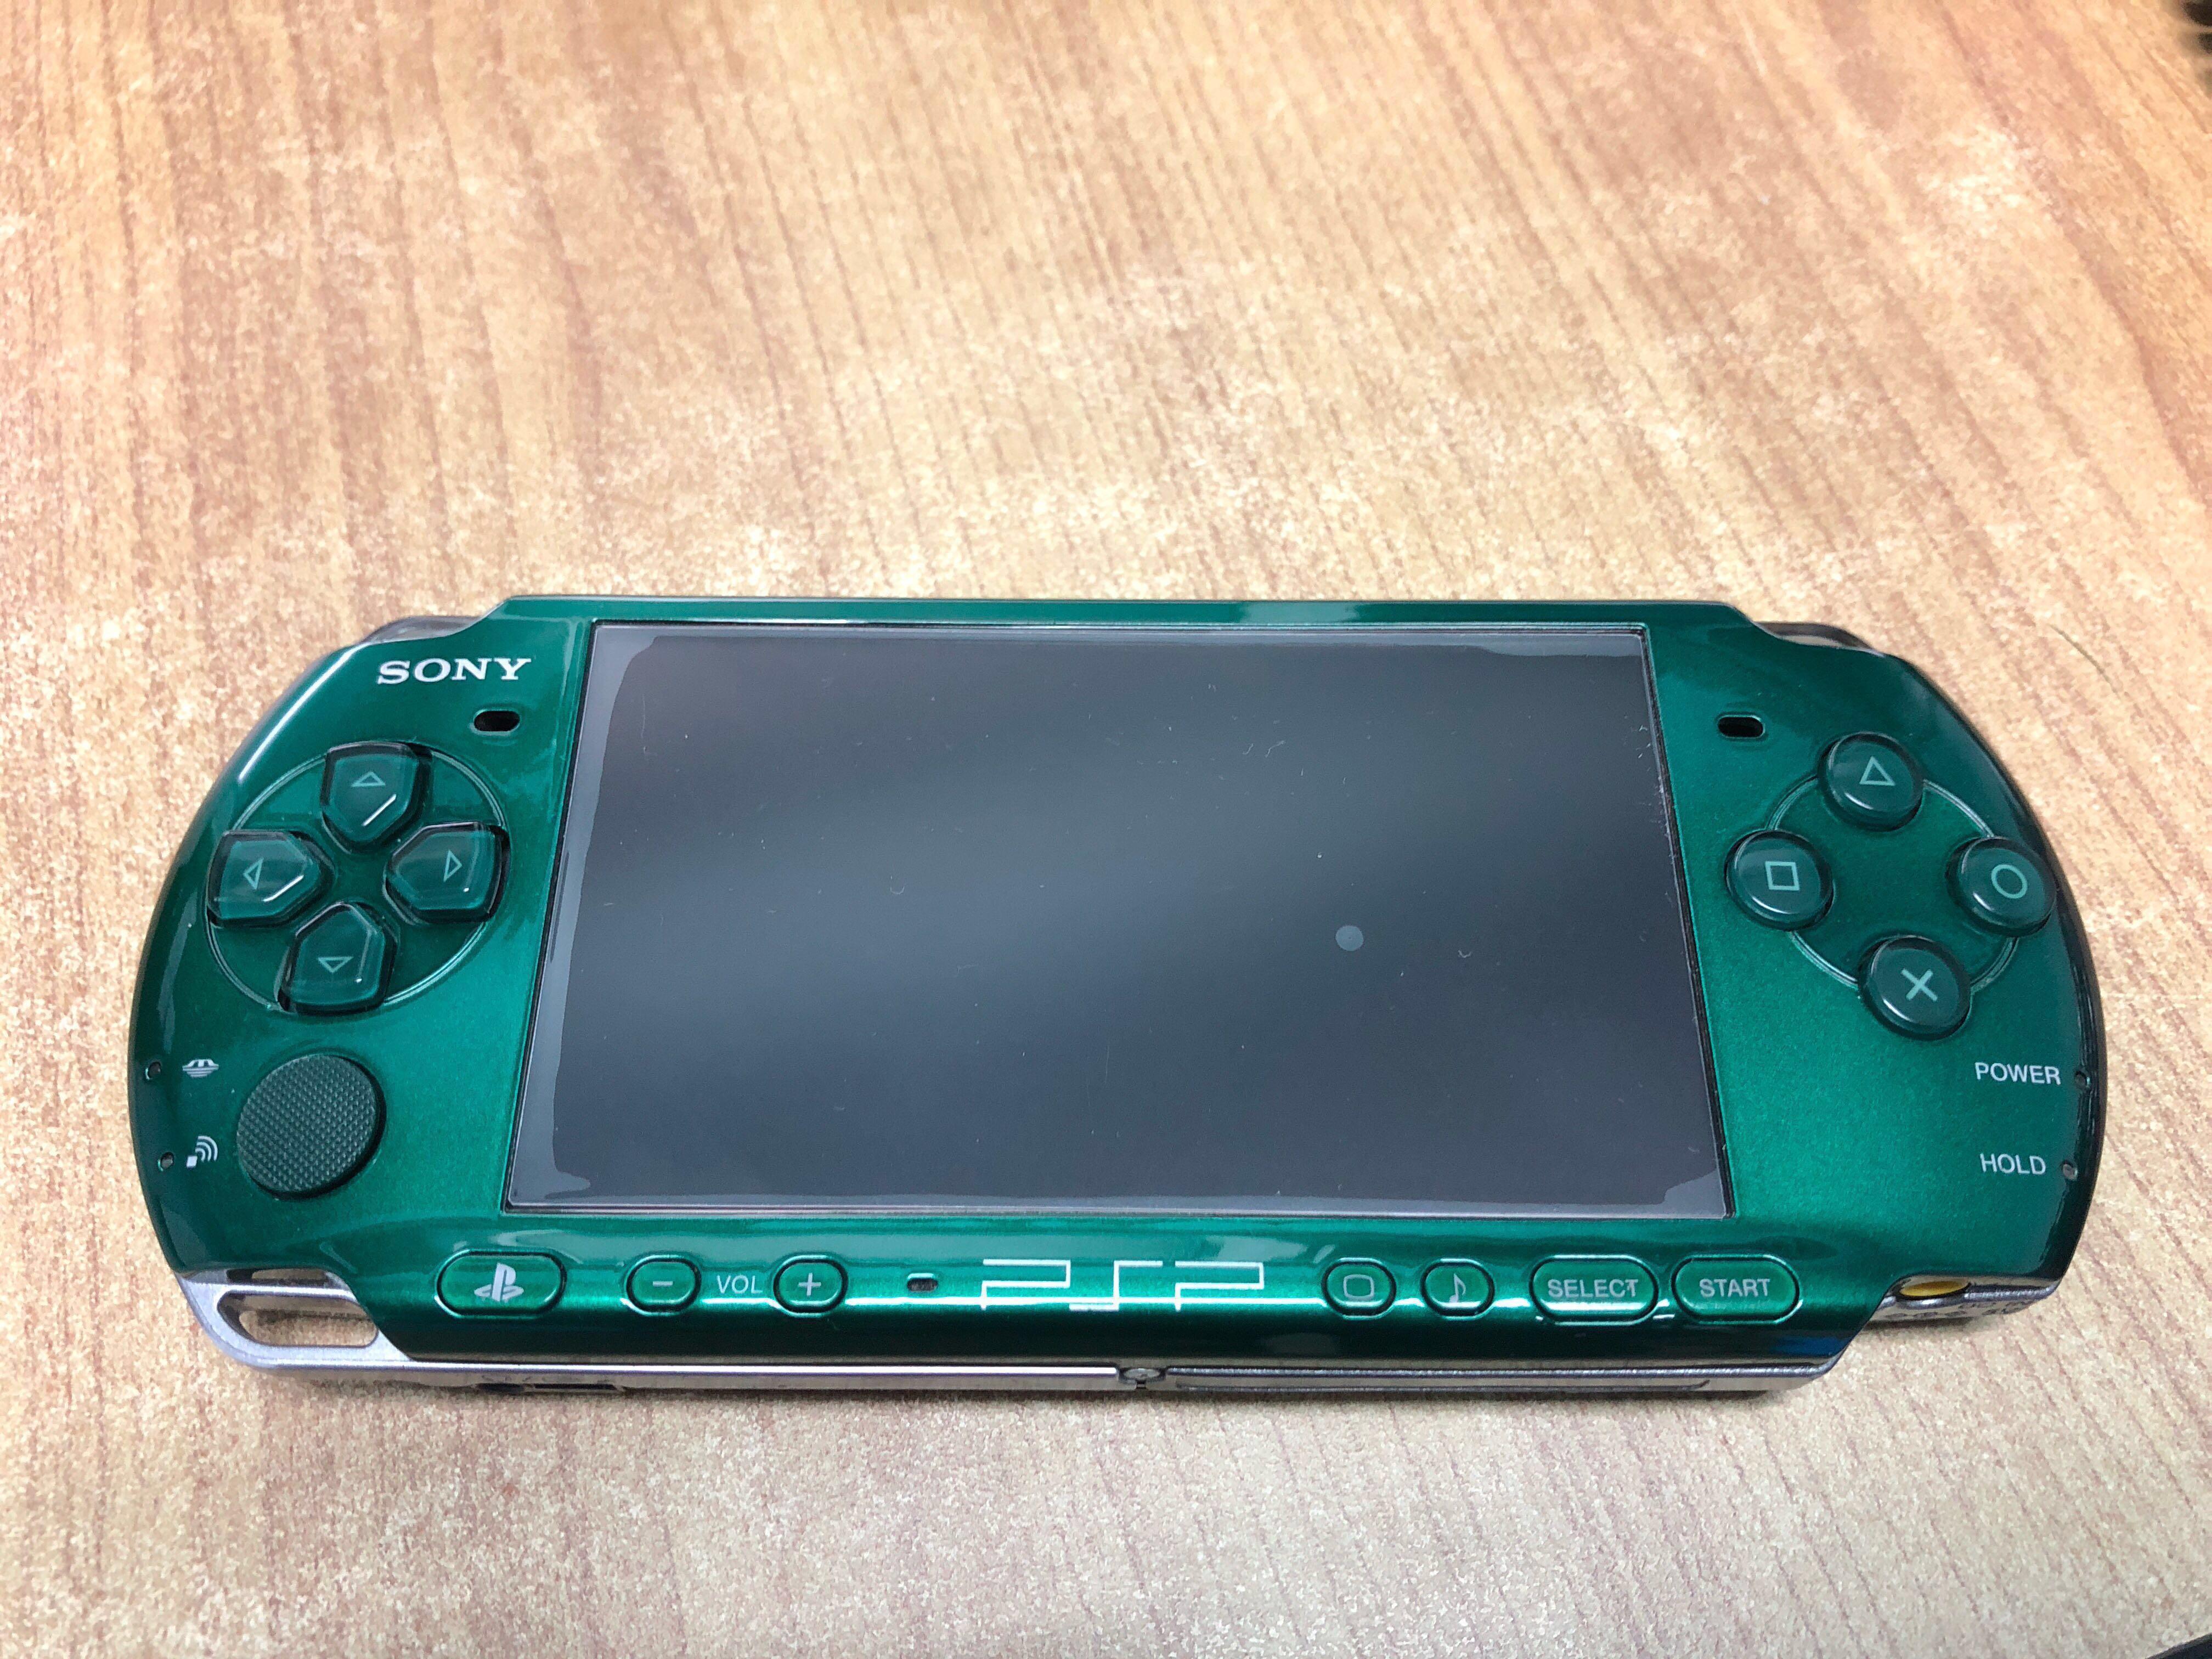 Sony Psp 3000 Metallic Green Modified Toys Games Video Gaming Consoles On Carousell